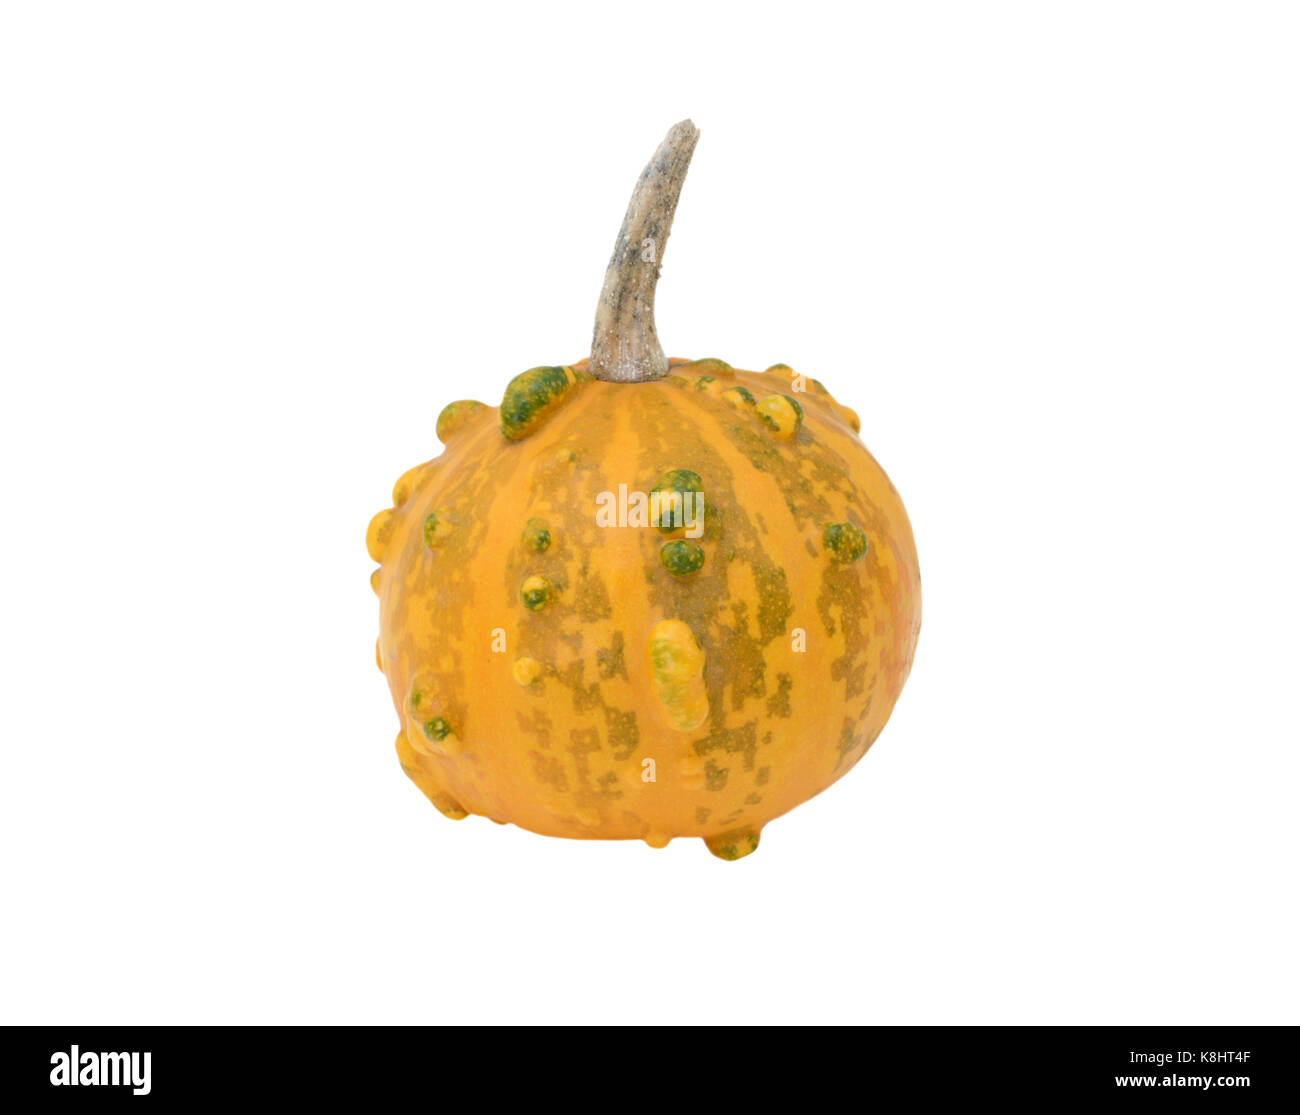 Small round warty ornamental gourd, orange with green markings, isolated on a white background Stock Photo